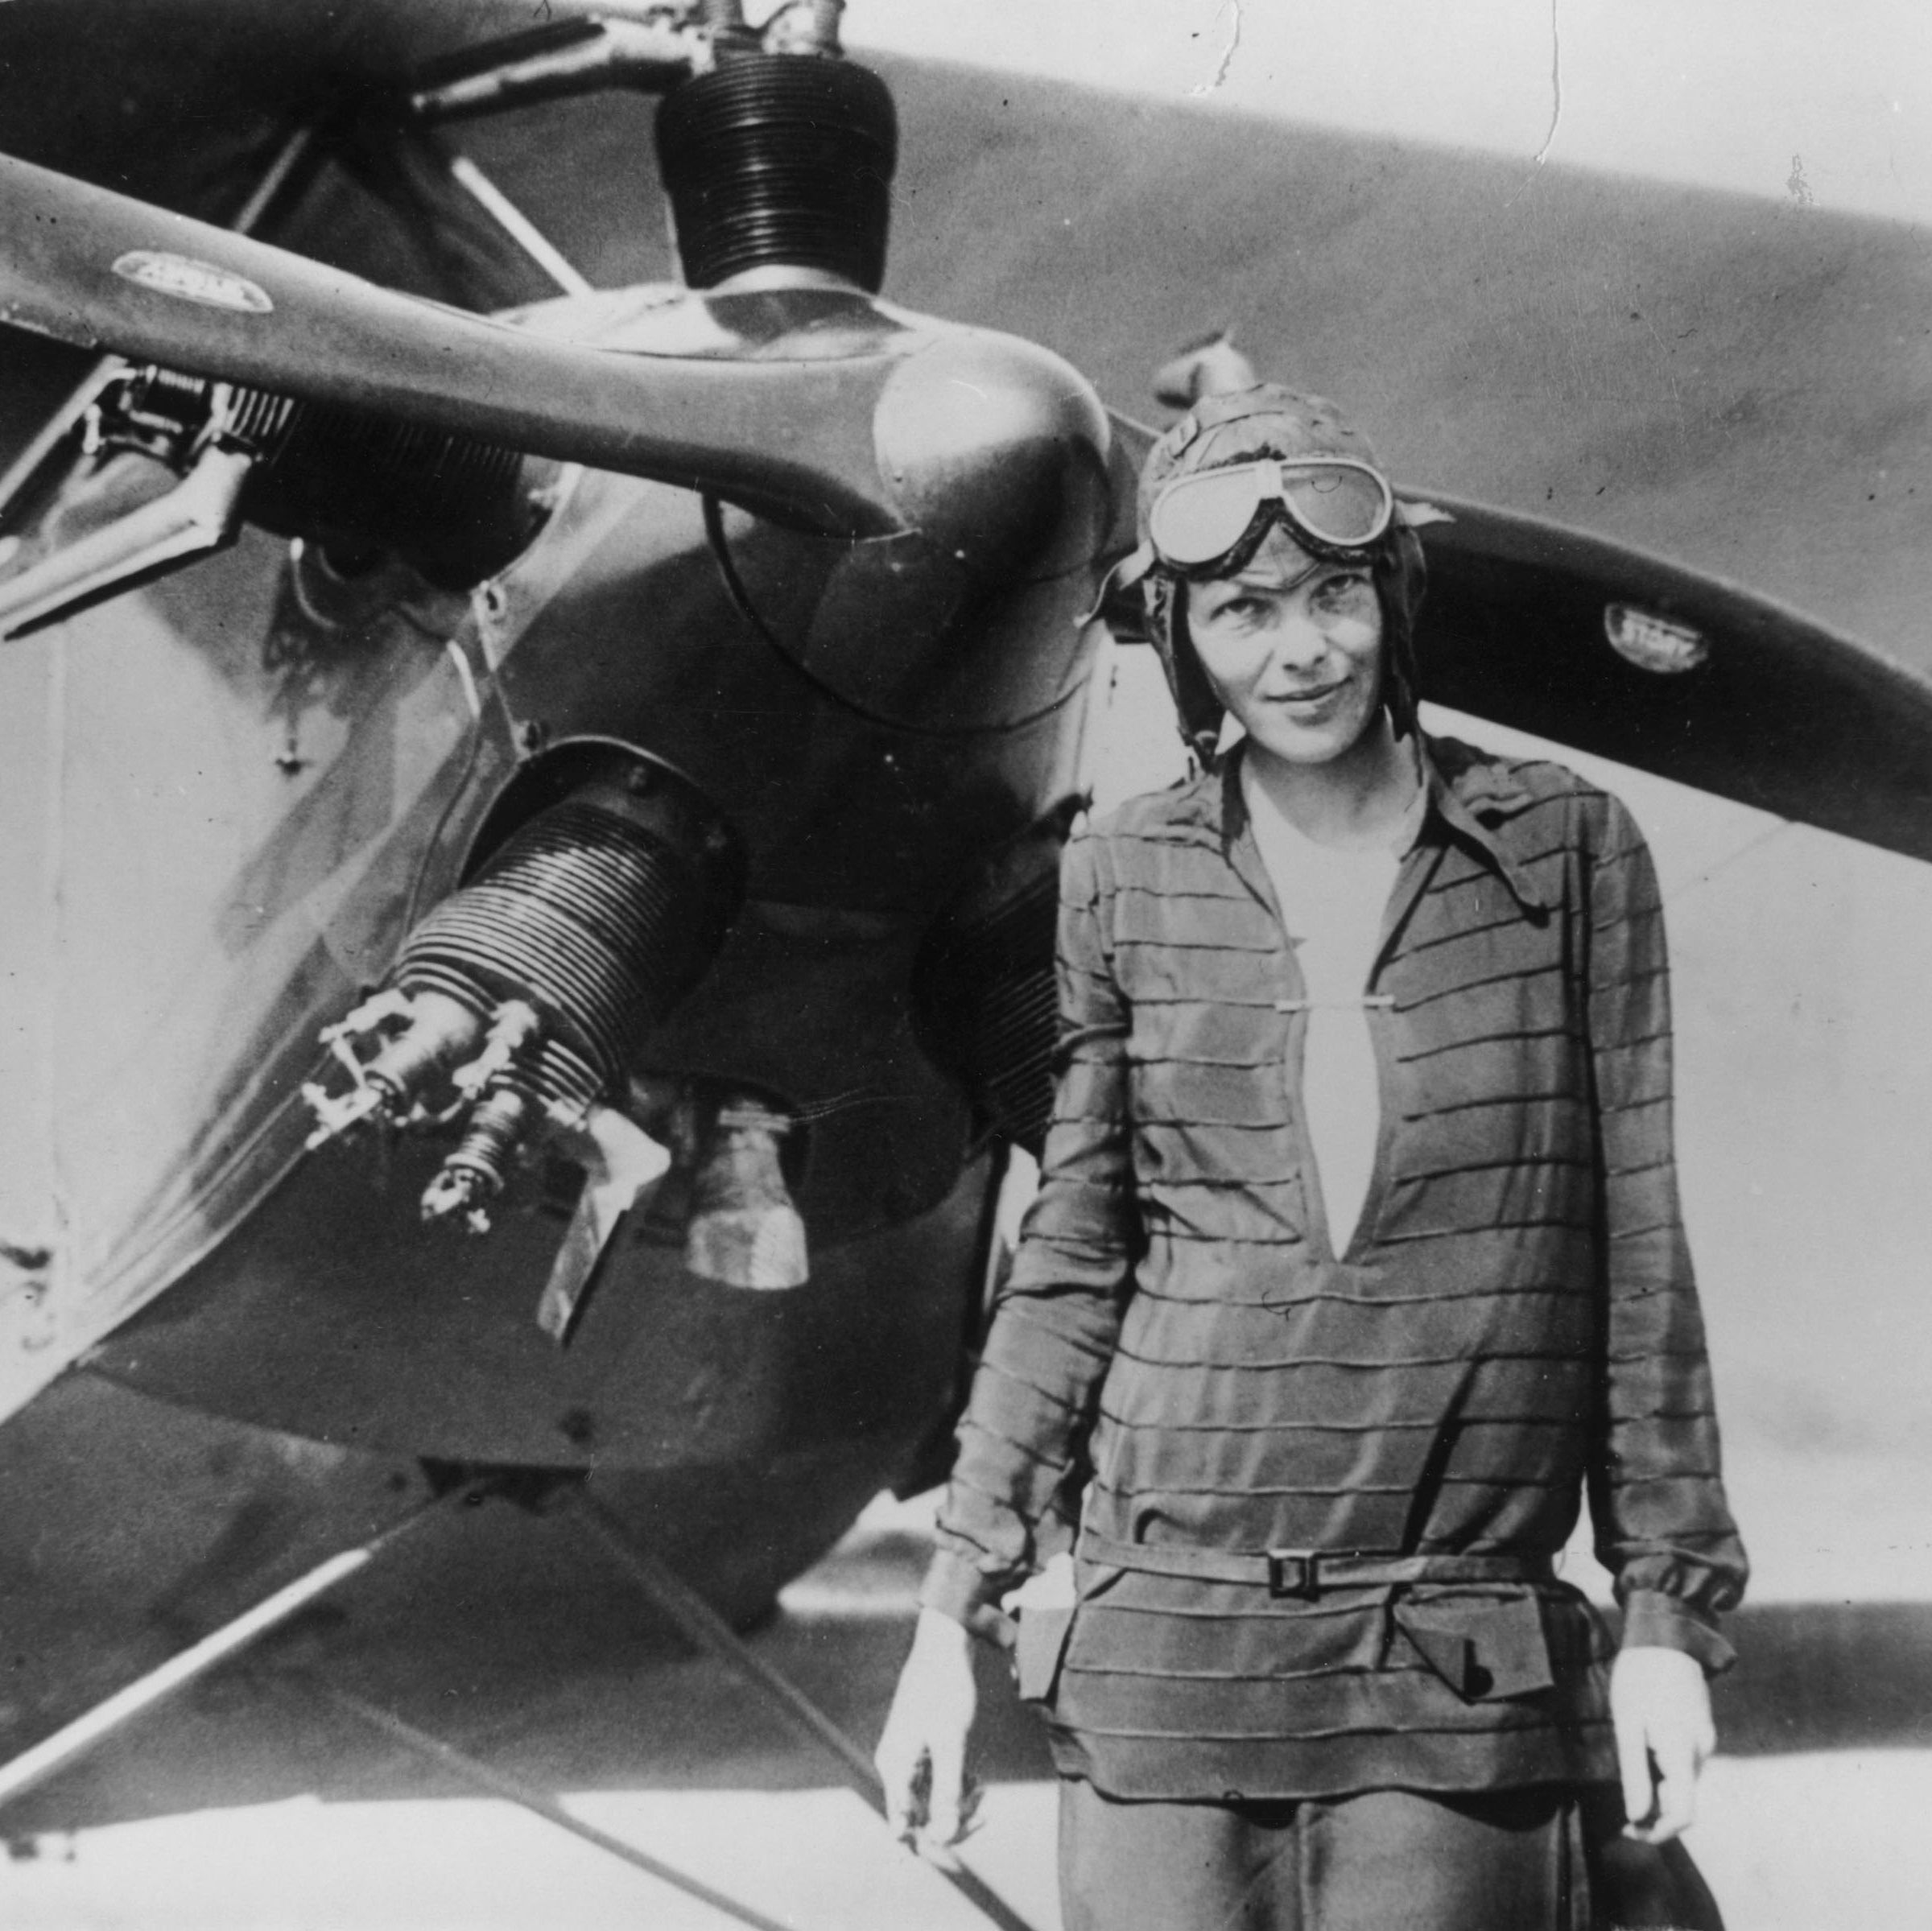 We've Been Looking for Amelia Earhart for 86 Years. A Photo May Have Finally Found Her.